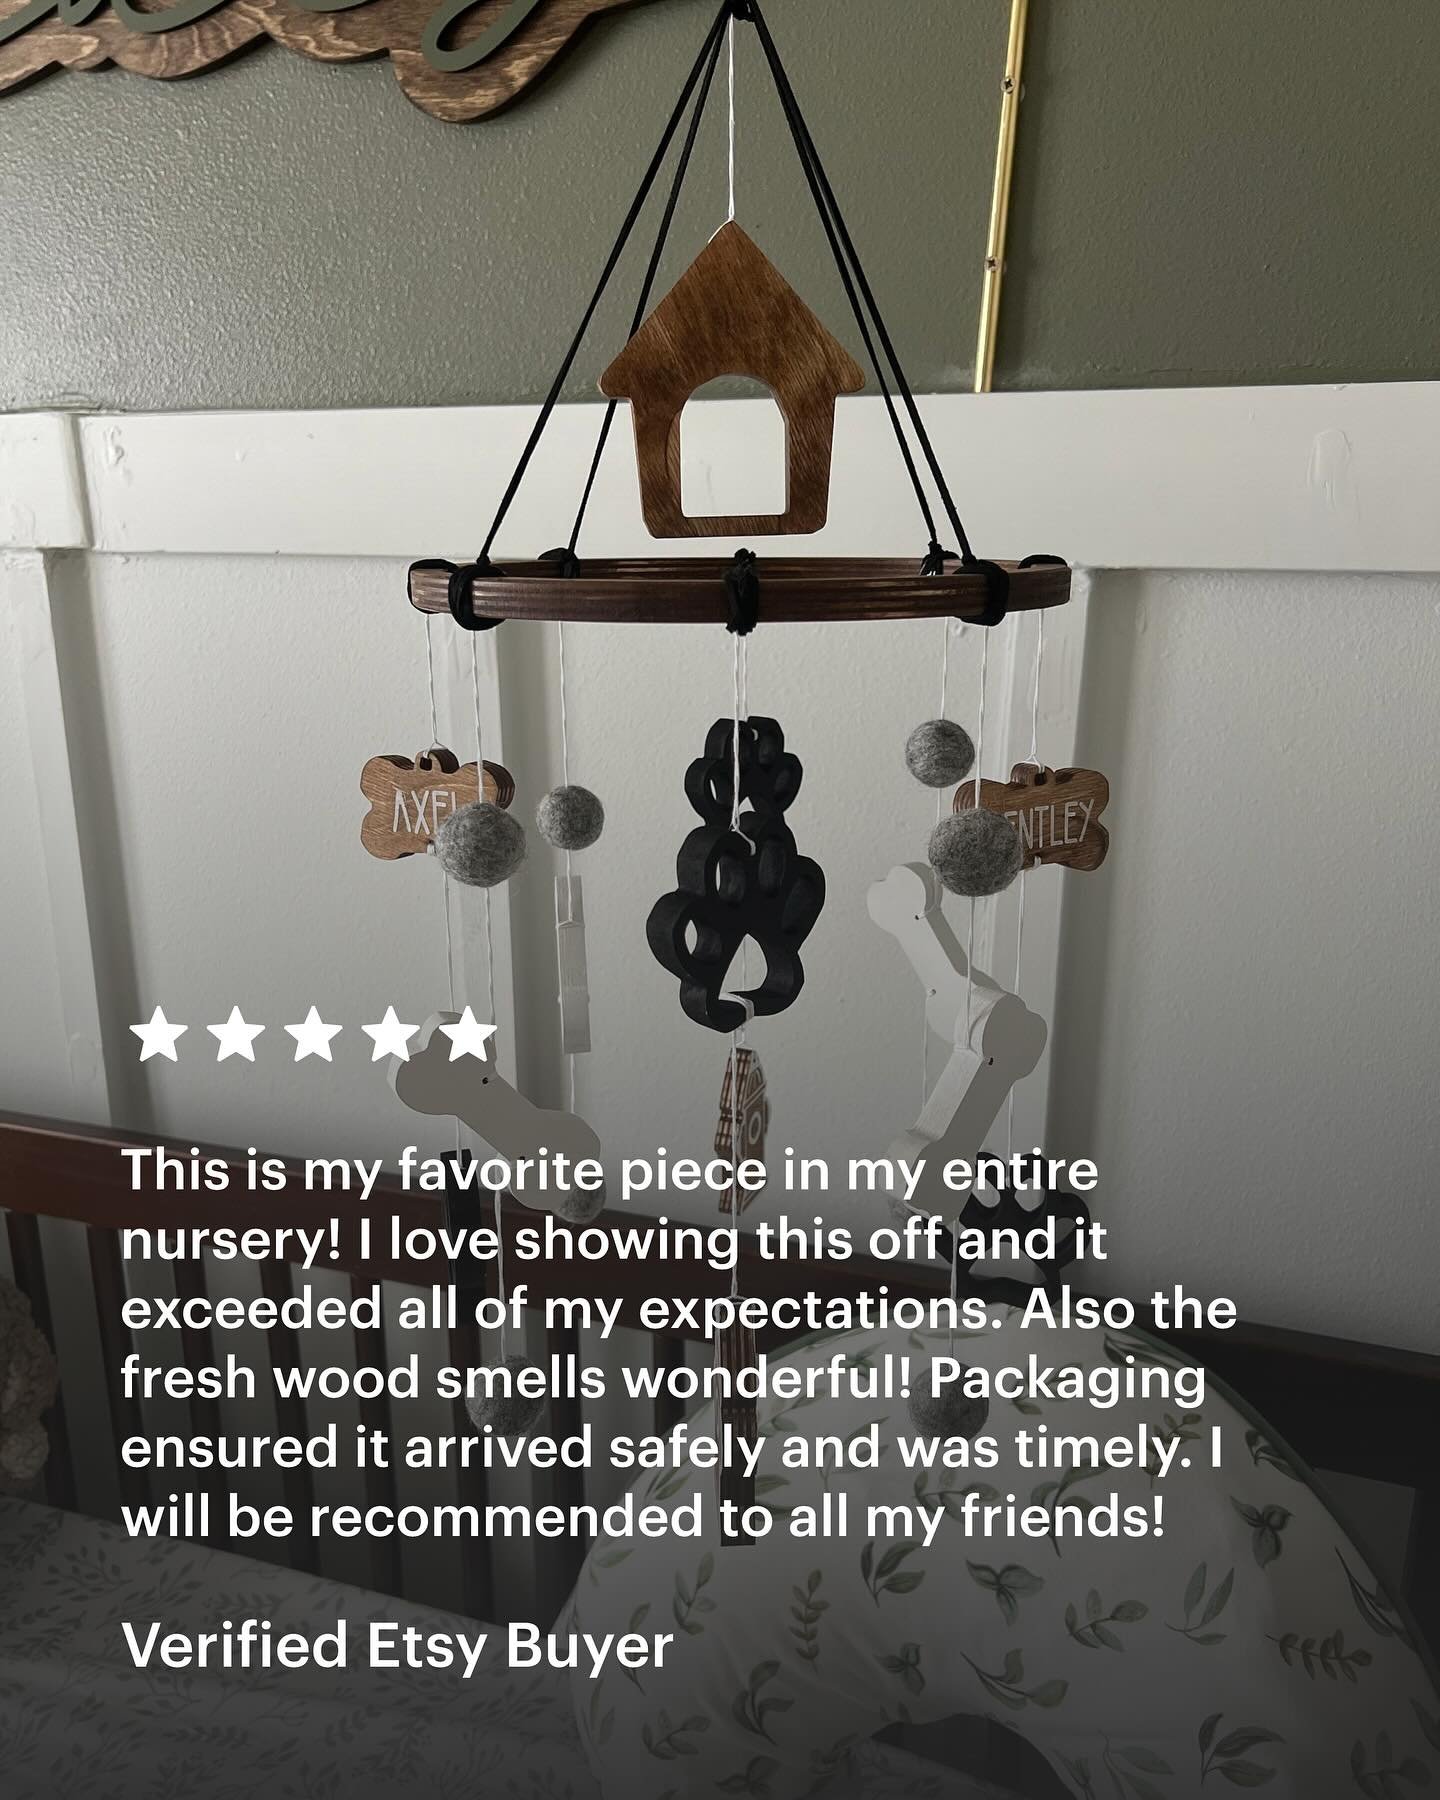 Even after 780+ 5-star reviews, seeing the joy my handcrafted pieces bring moms still makes me smile. Thank you all for trusting me with your nurseries! 🥰